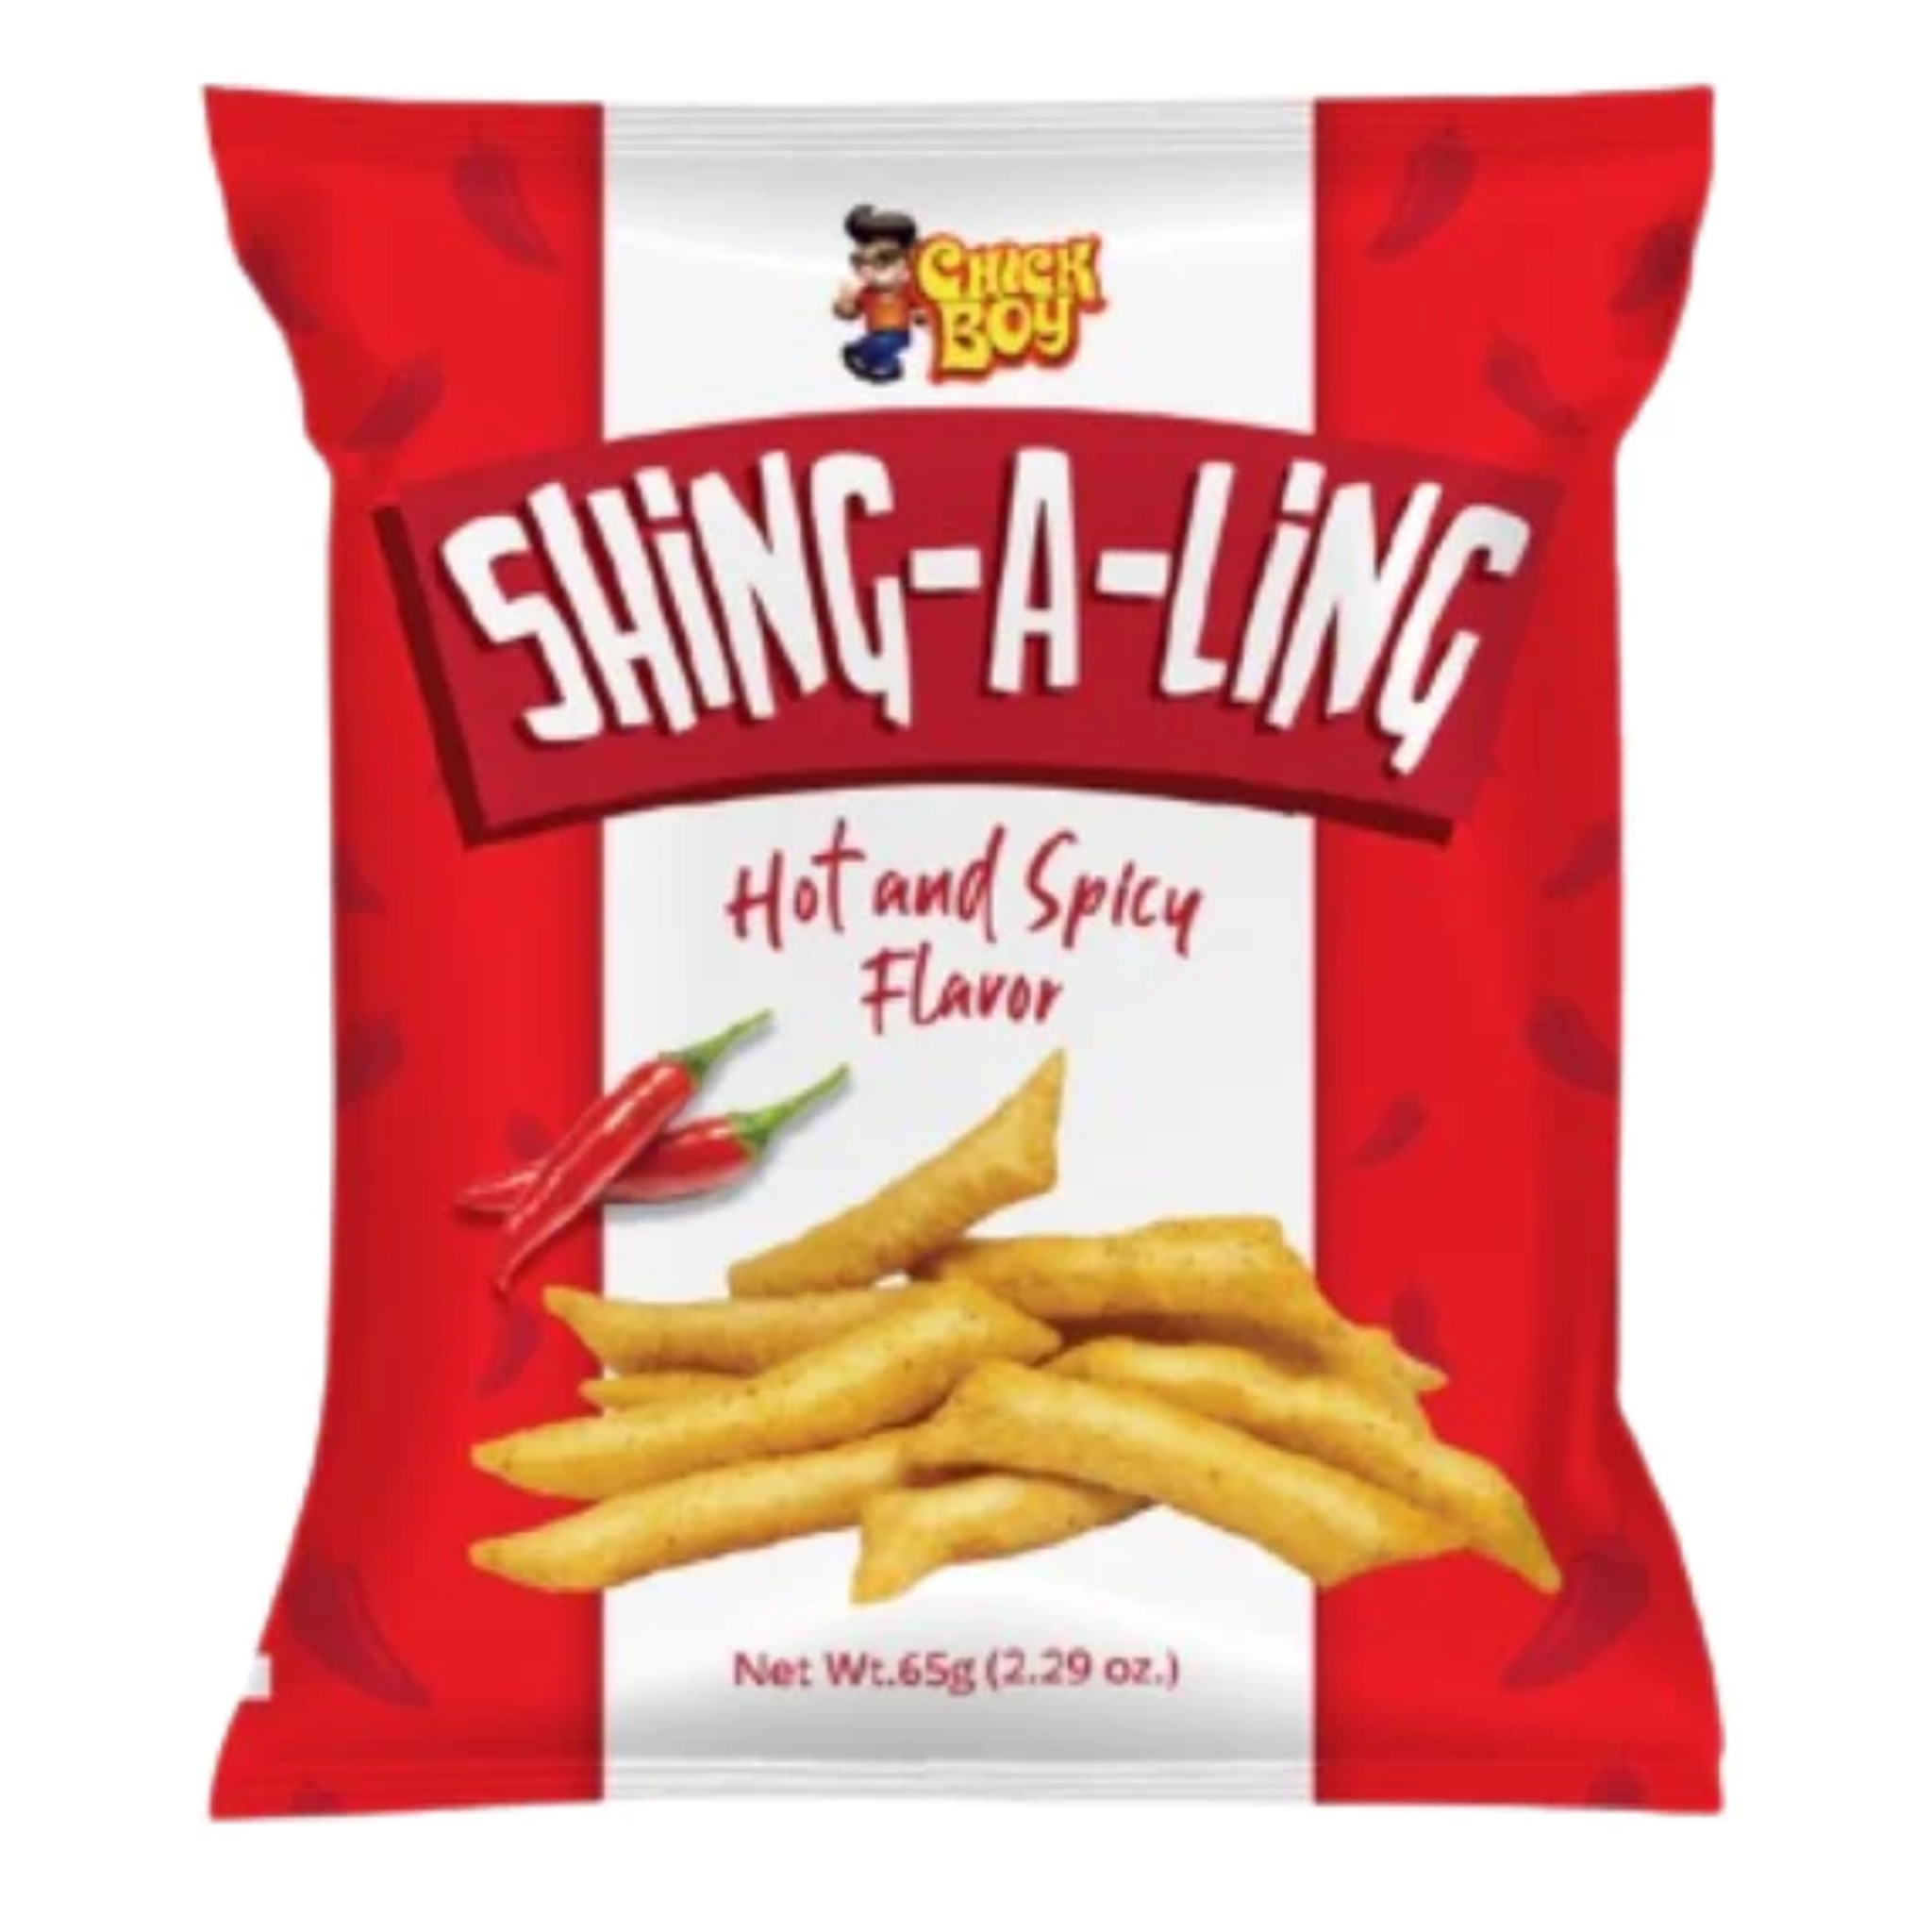 Shing-A-Ling - Hot and Spicy Flavour 65g by Hobe Chick Boy